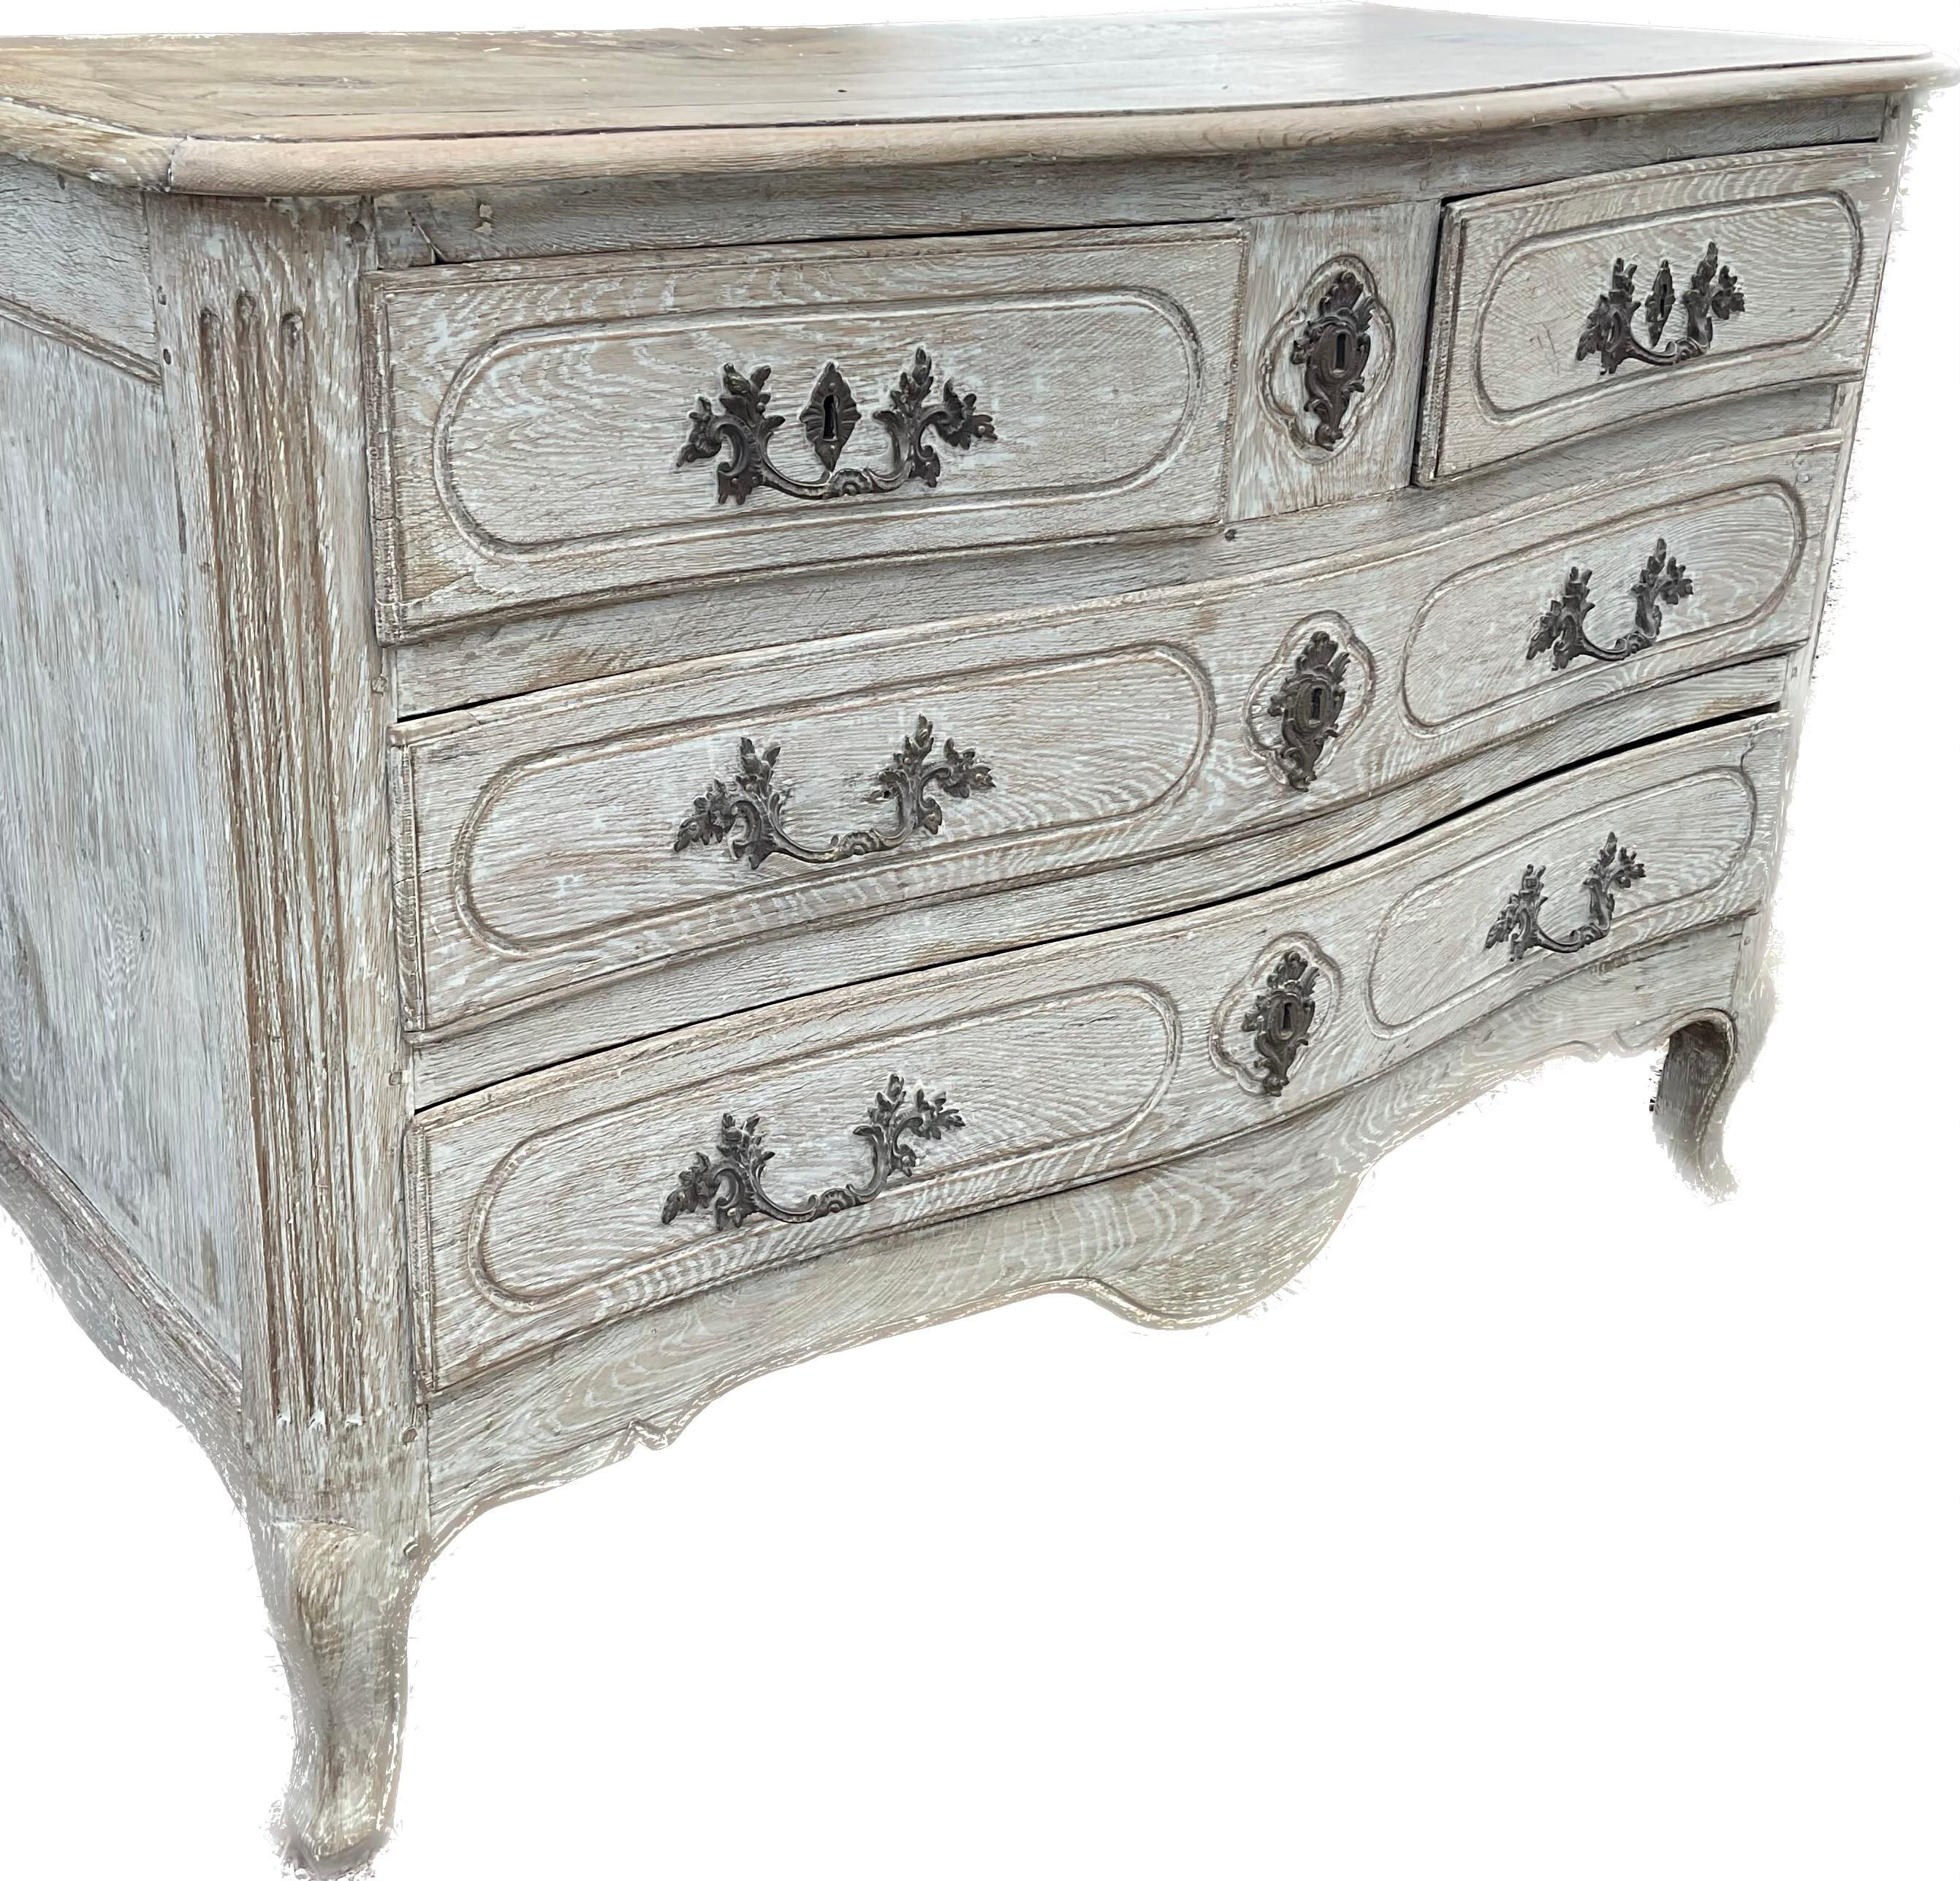 Early 19th century Louis XV chest. Serpentine front with two smaller top drawers and two larger bottom drawers, on sturdy cabriole legs. Chest has a fabulous bleached painted finish in a wonderful old mellow patina with fine brass fittings.